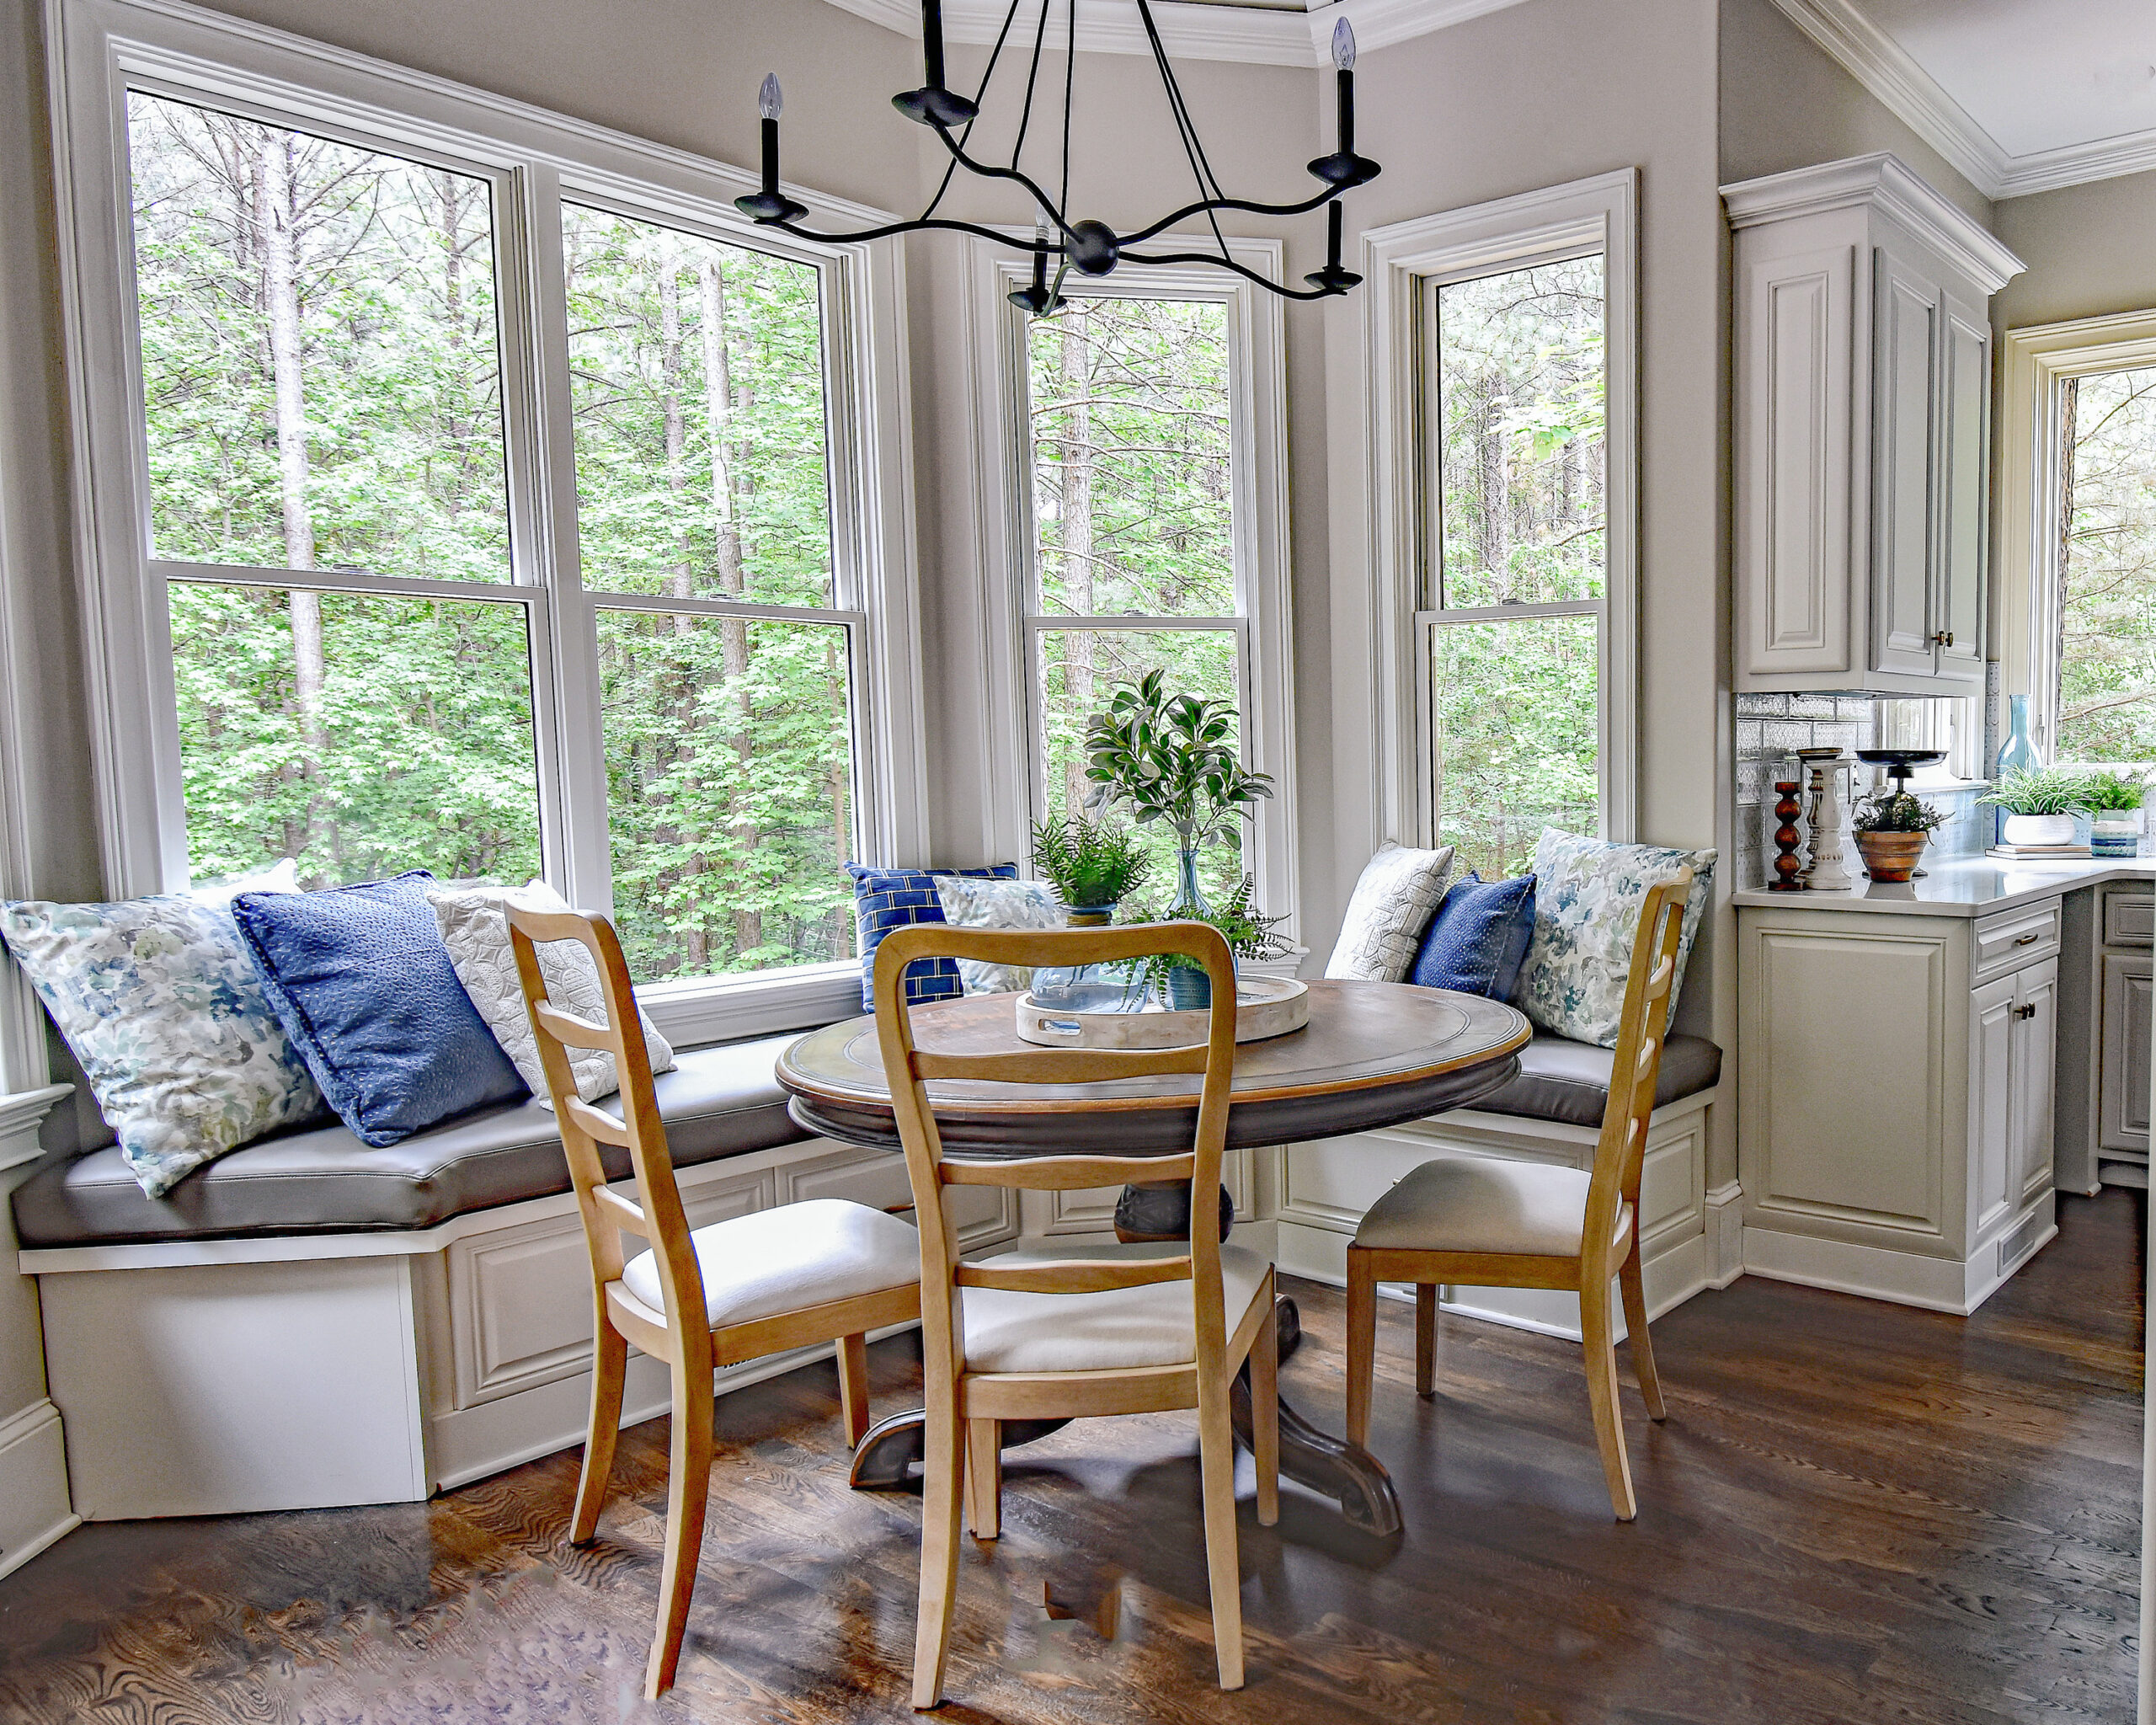 A beautiful breakfast nook with a wall of windows and a banquette seating